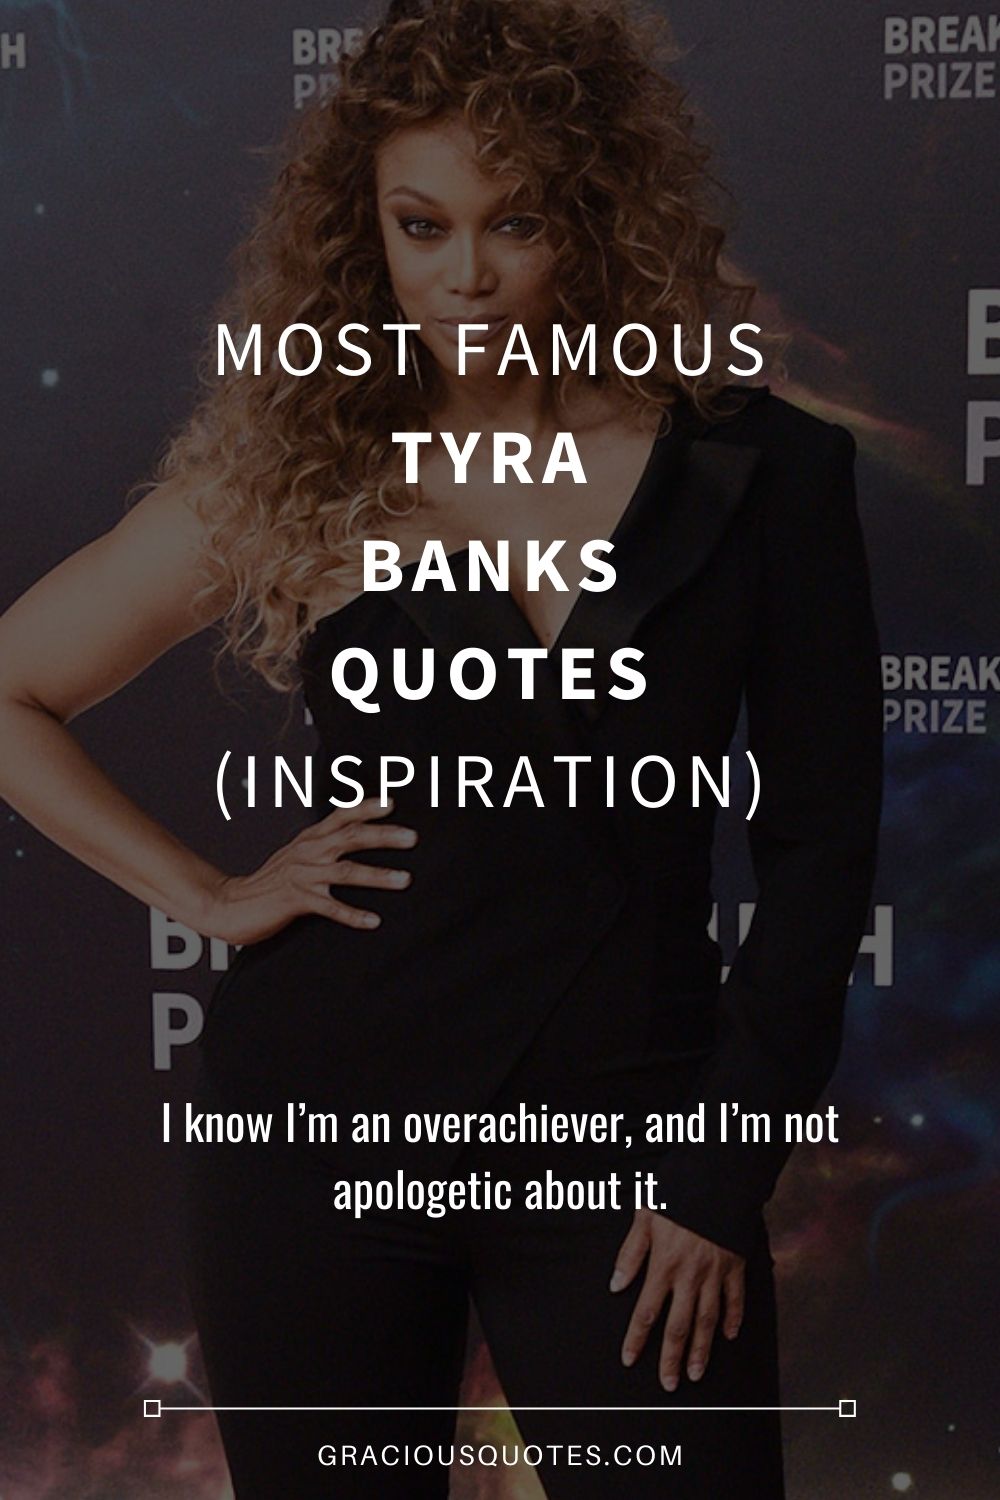 Most Famous Tyra Banks Quotes (INSPIRATION) - Gracious Quotes